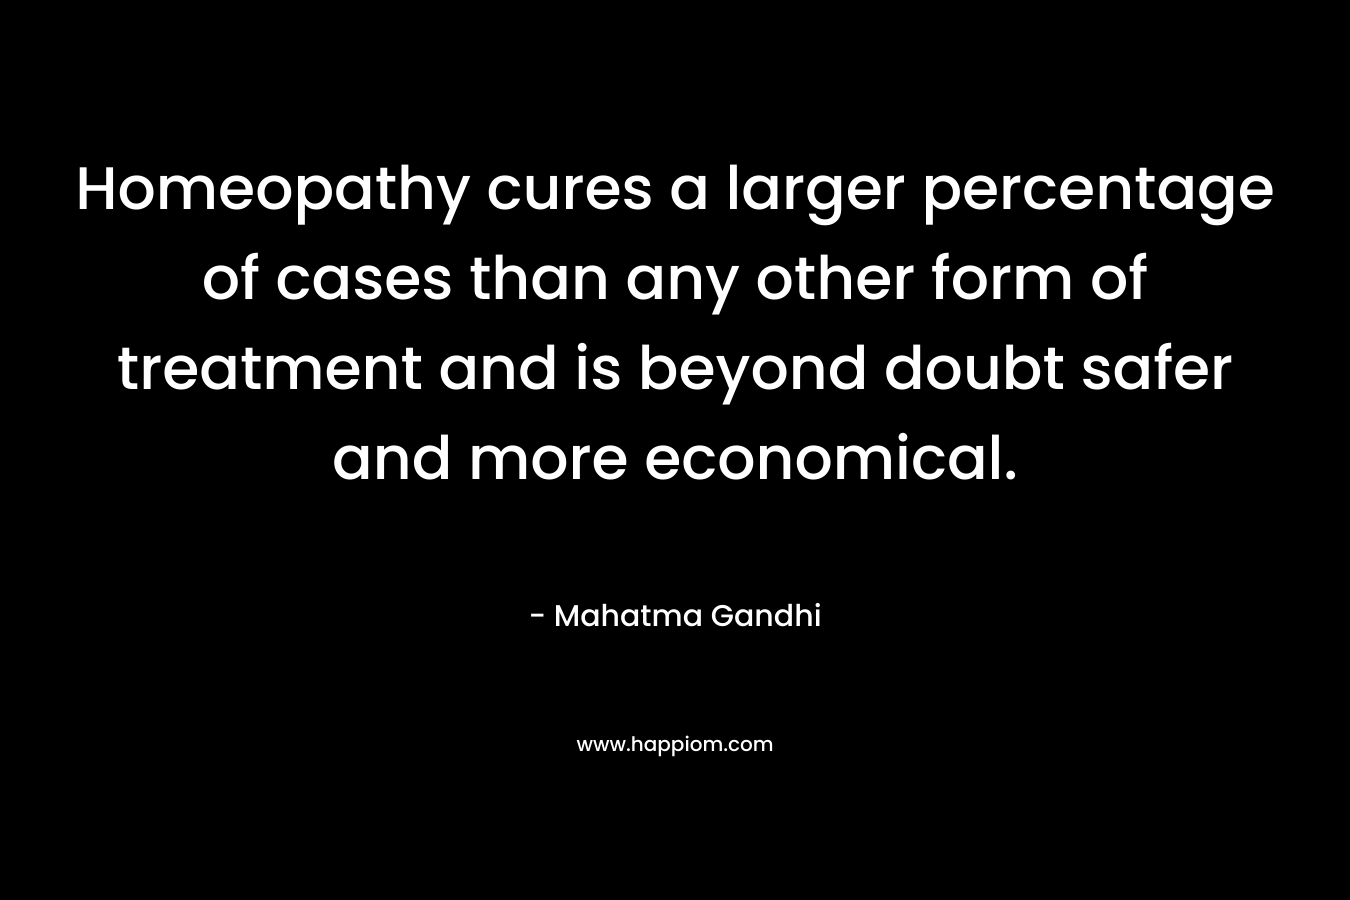 Homeopathy cures a larger percentage of cases than any other form of treatment and is beyond doubt safer and more economical.